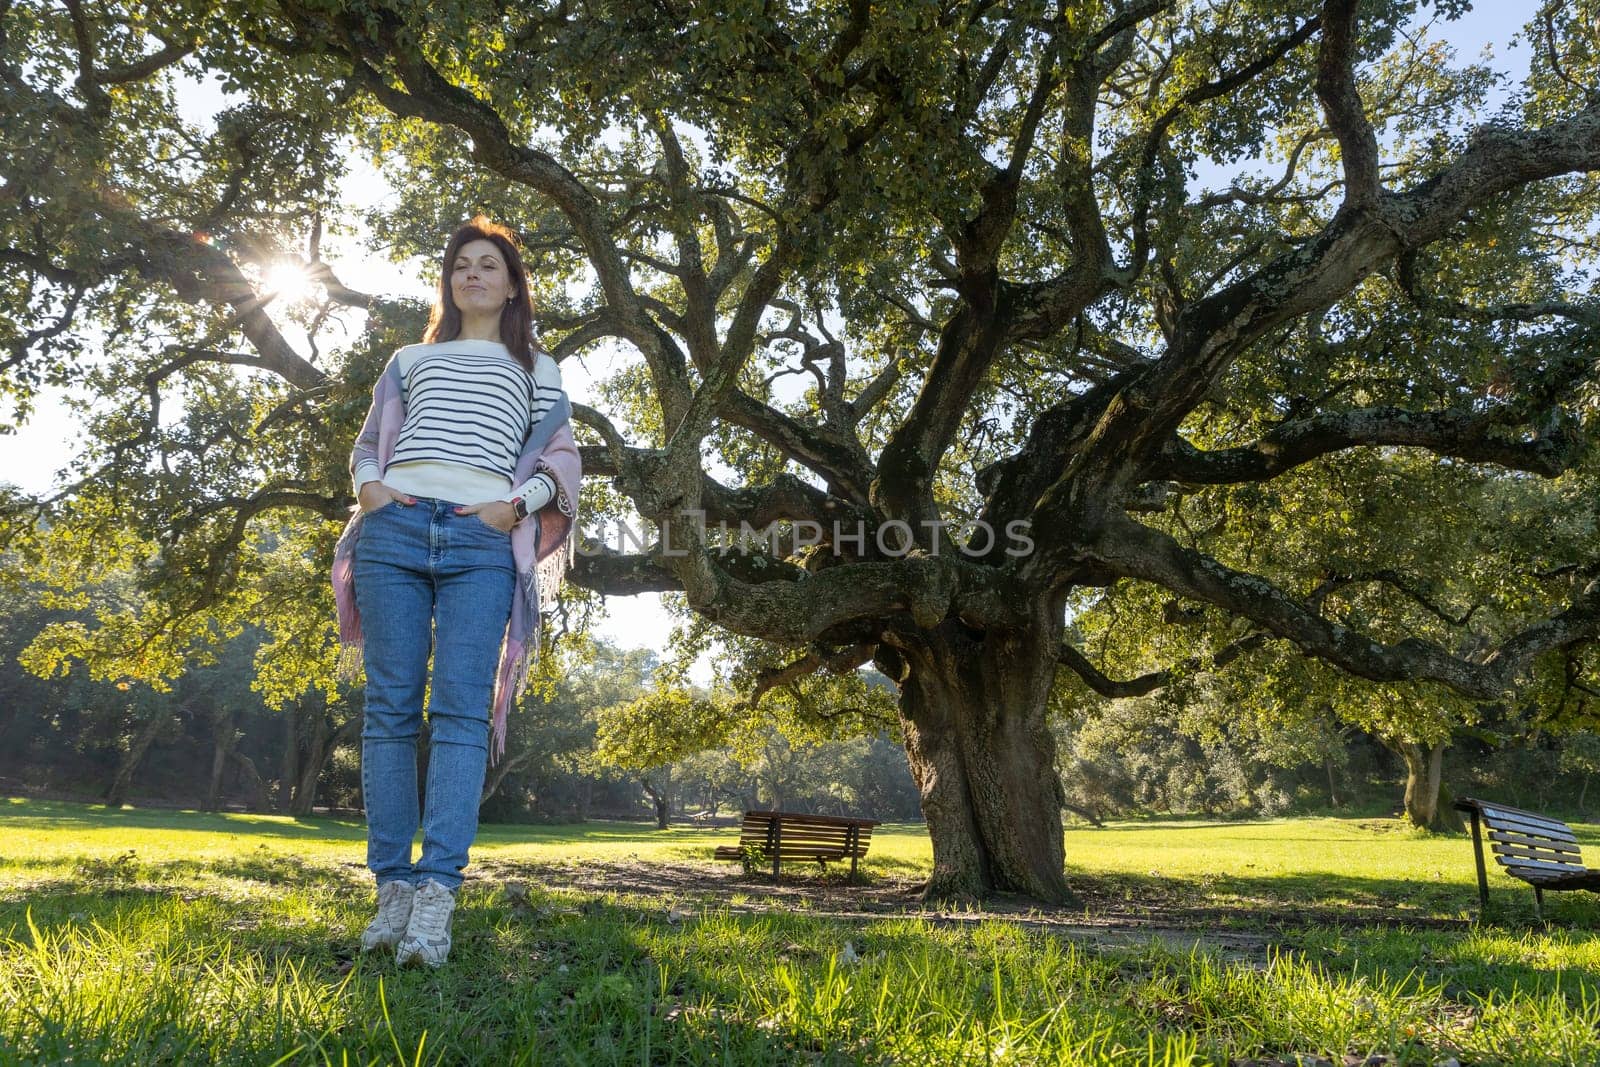 A woman stands in front of a large tree, wearing a white shirt and blue jeans. The scene is peaceful and serene, with the woman looking up at the tree and the sun shining through the leaves